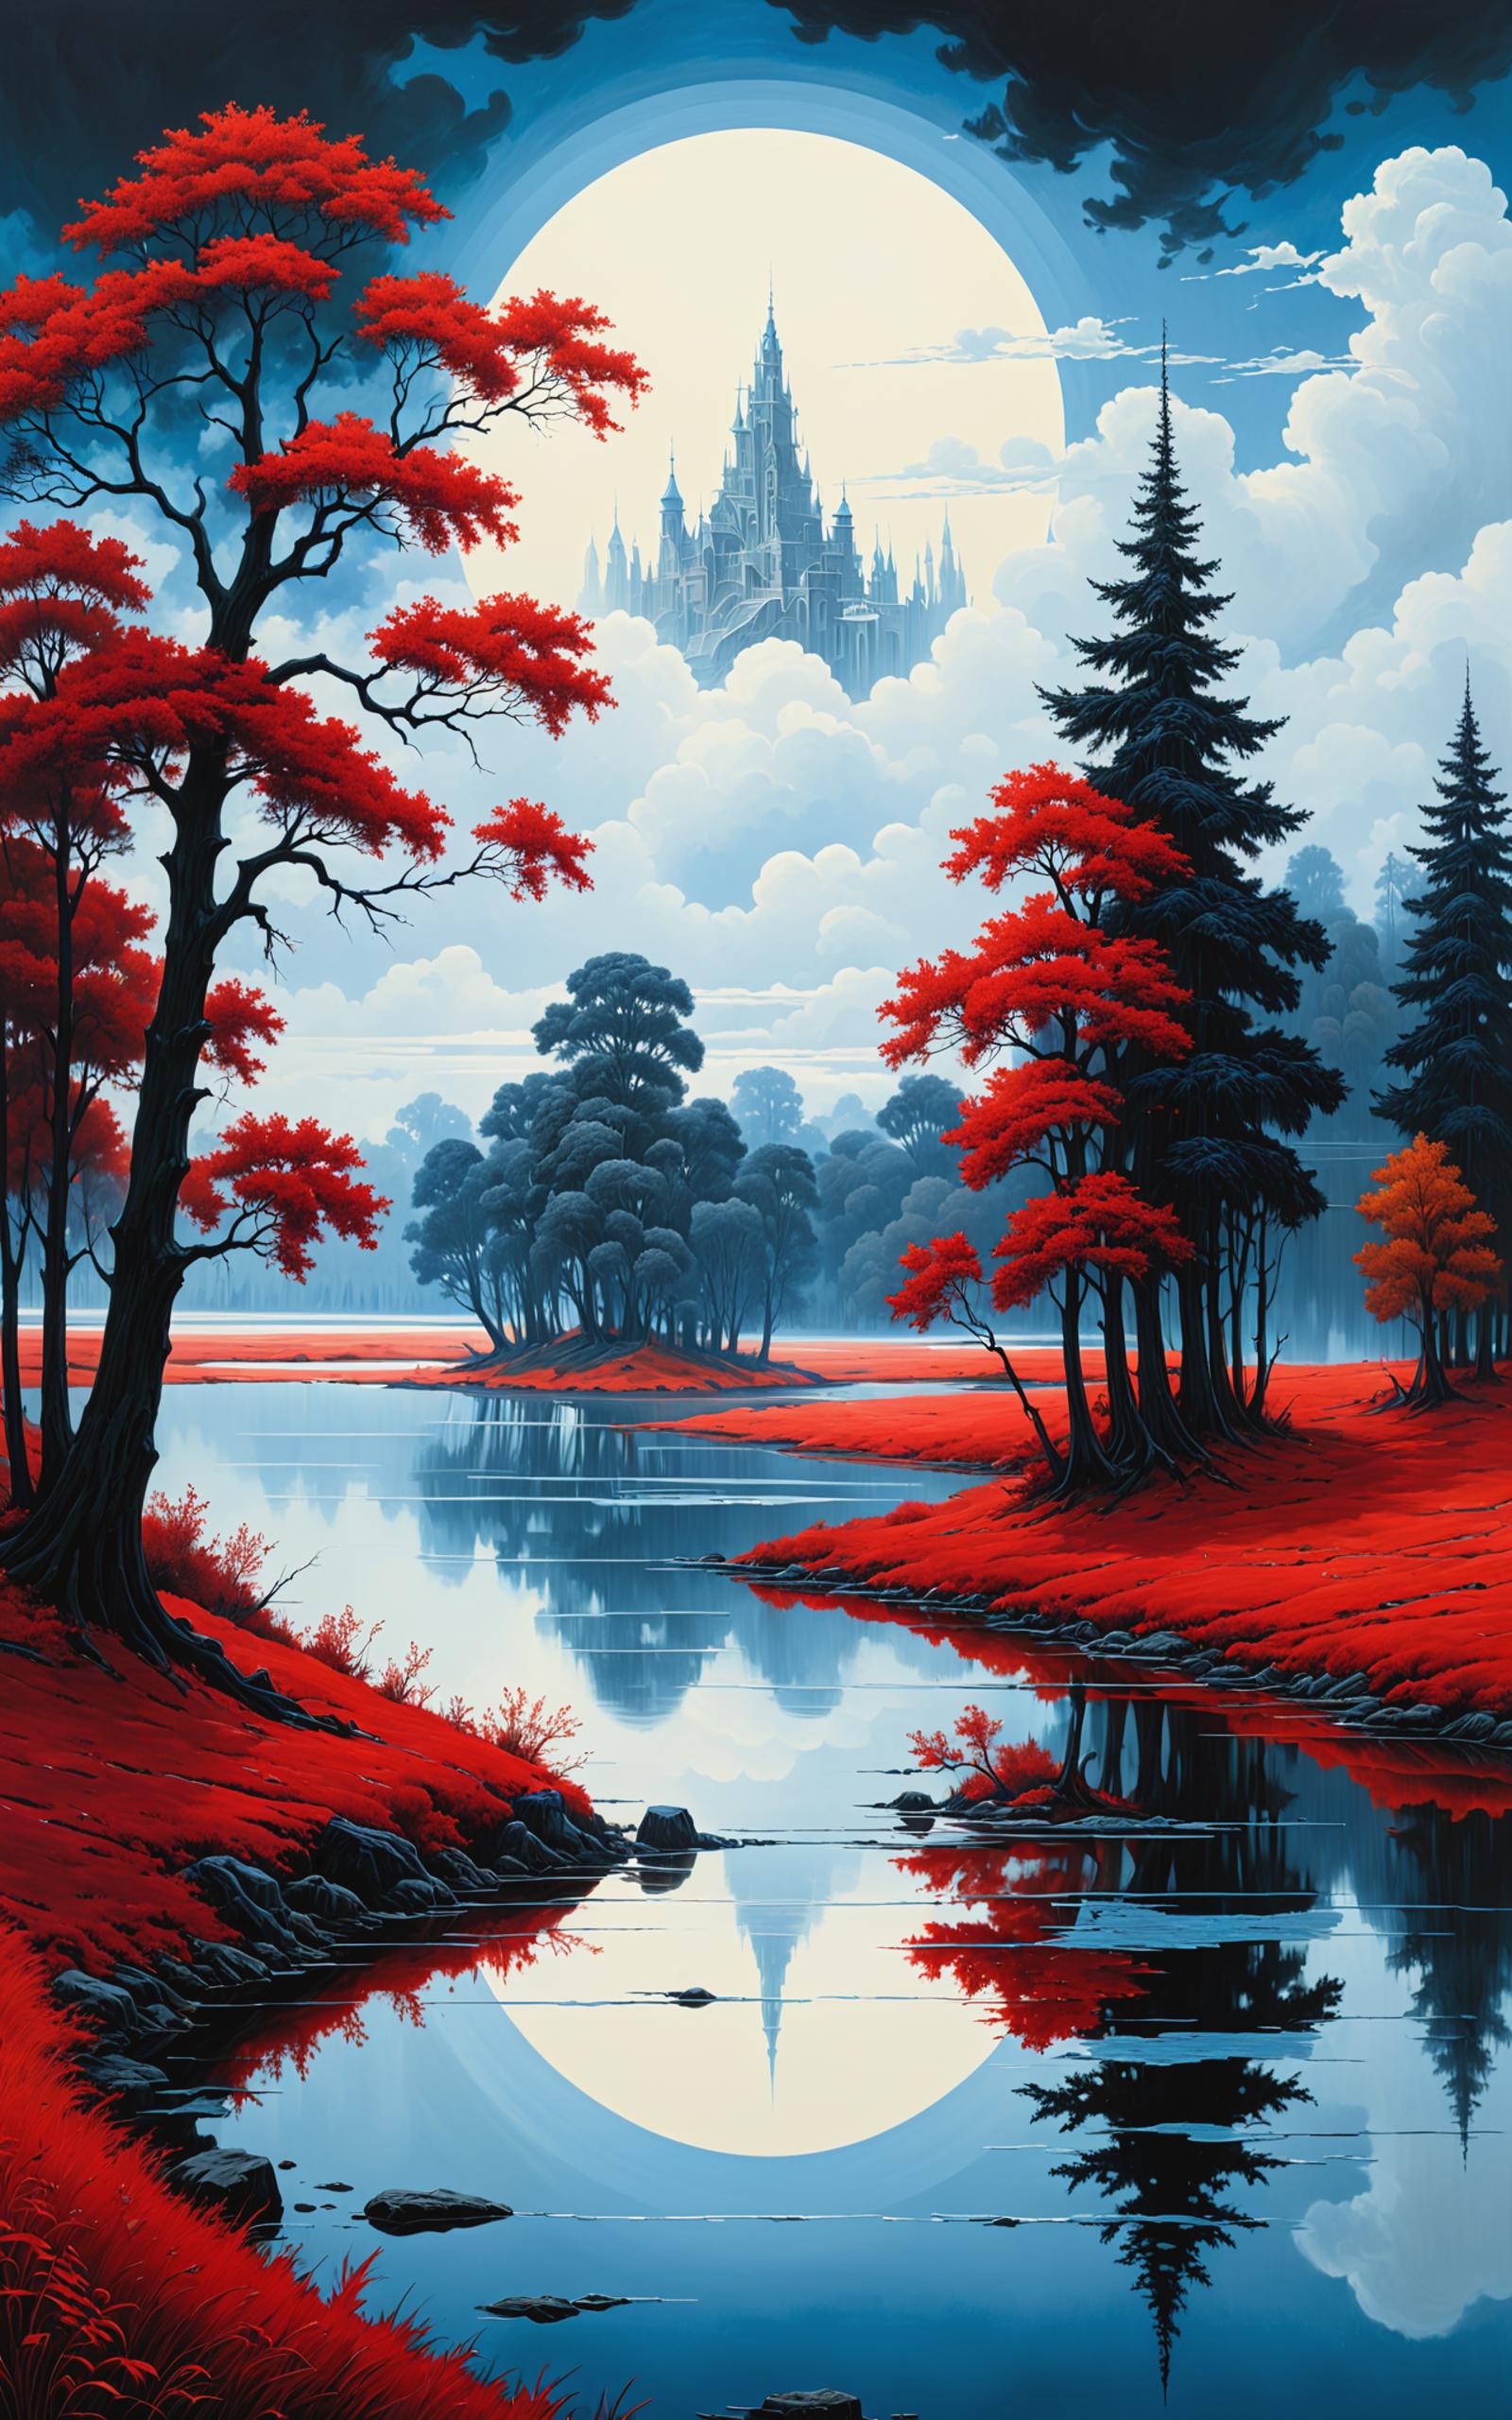 A beautiful painting of a forest with a river and a castle in the background.